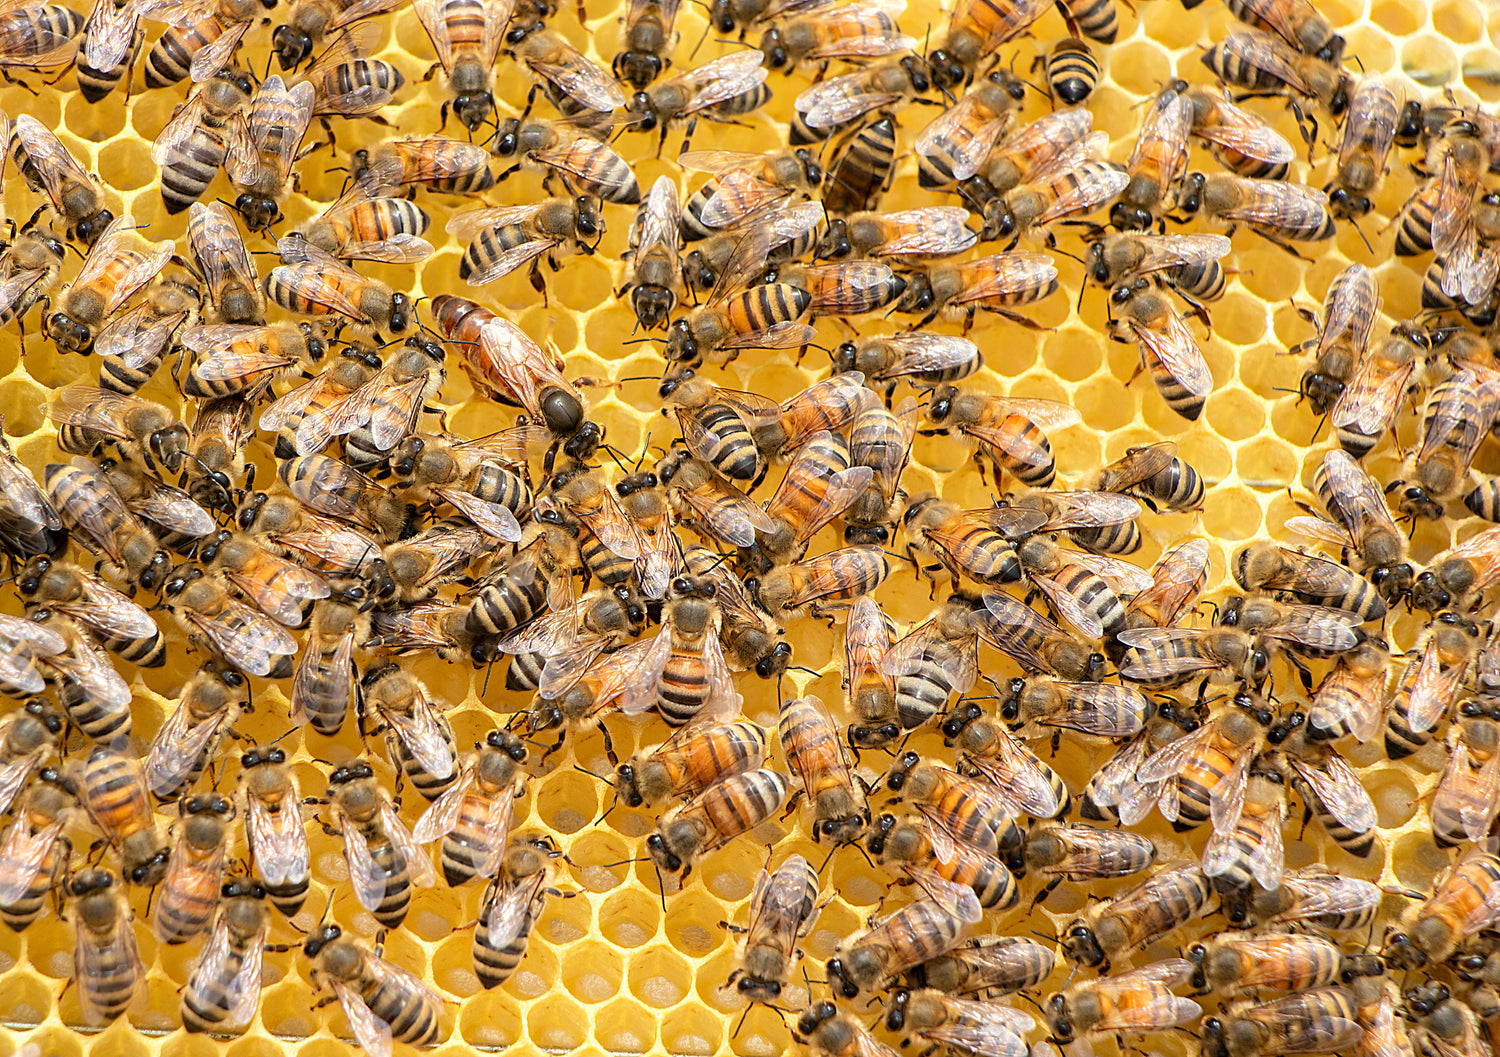 Let's learn about Bees and Beeswax